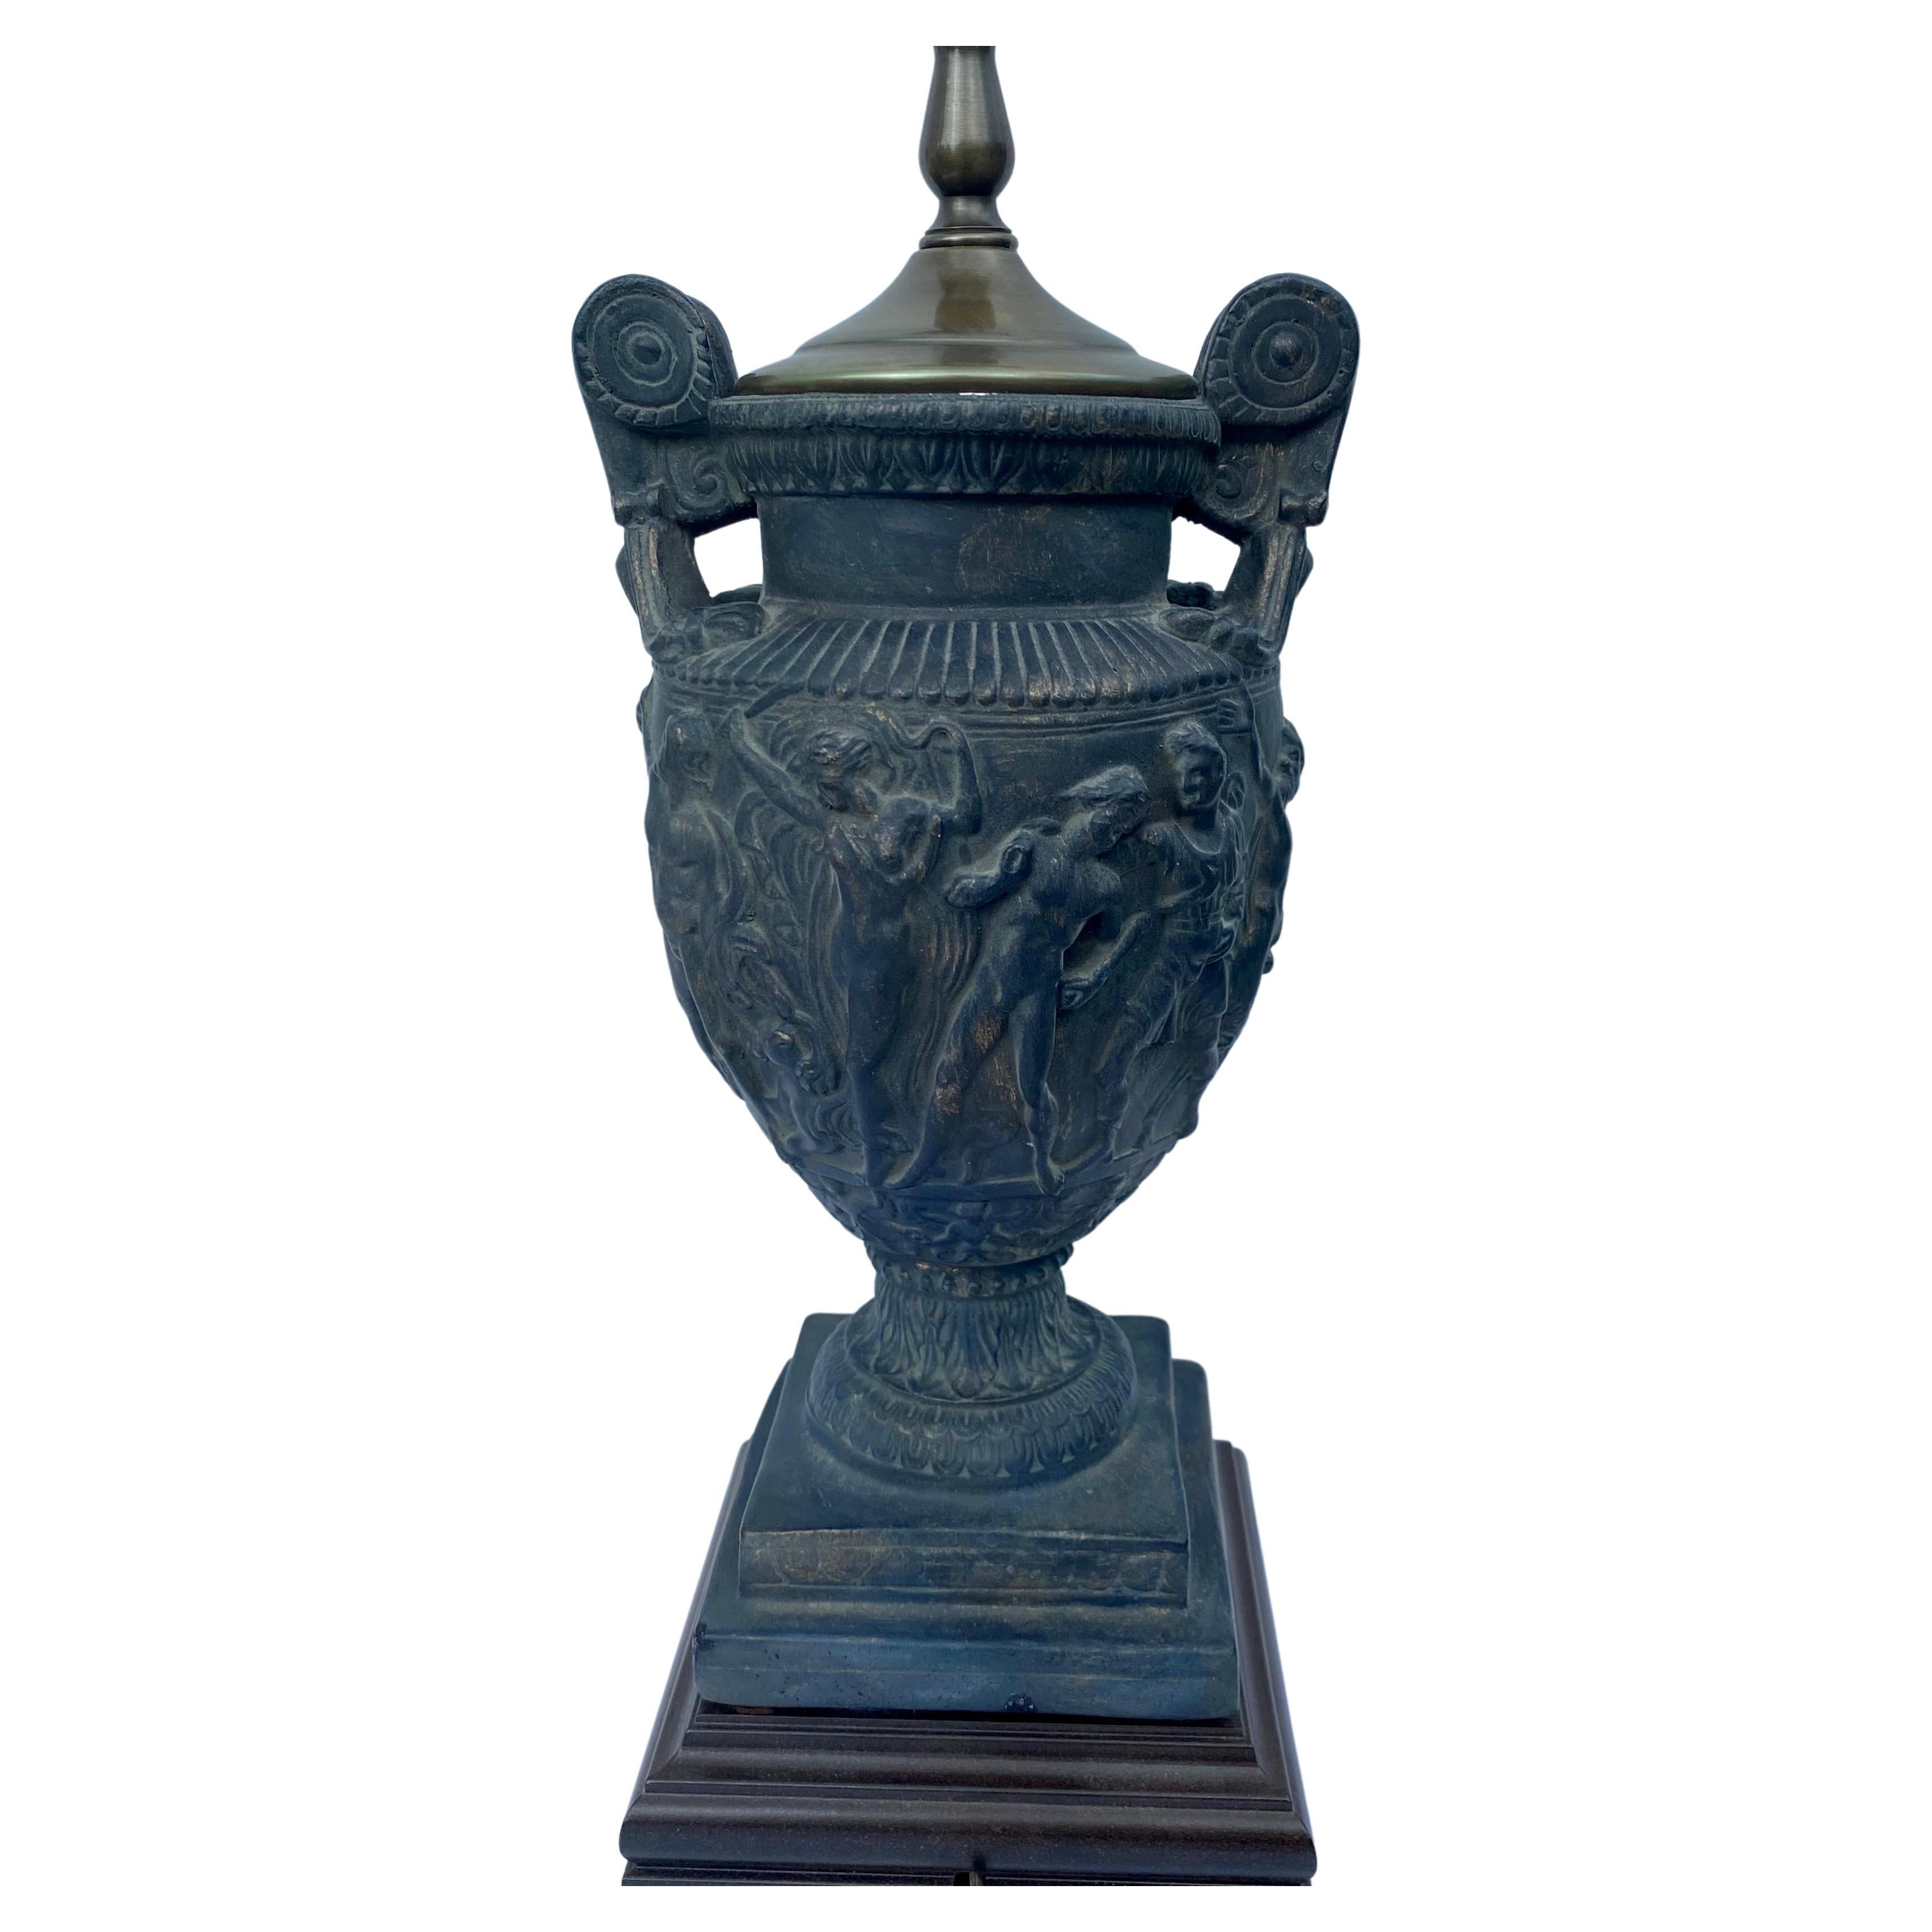 Classical handled urn table lamp mounted on sqaure wood plinth base. This urn form lamp is modeled after the Roman Towley Vase and features relief figures in an aged black patinaed finish. Lamp shade not included. 

Measures: 28